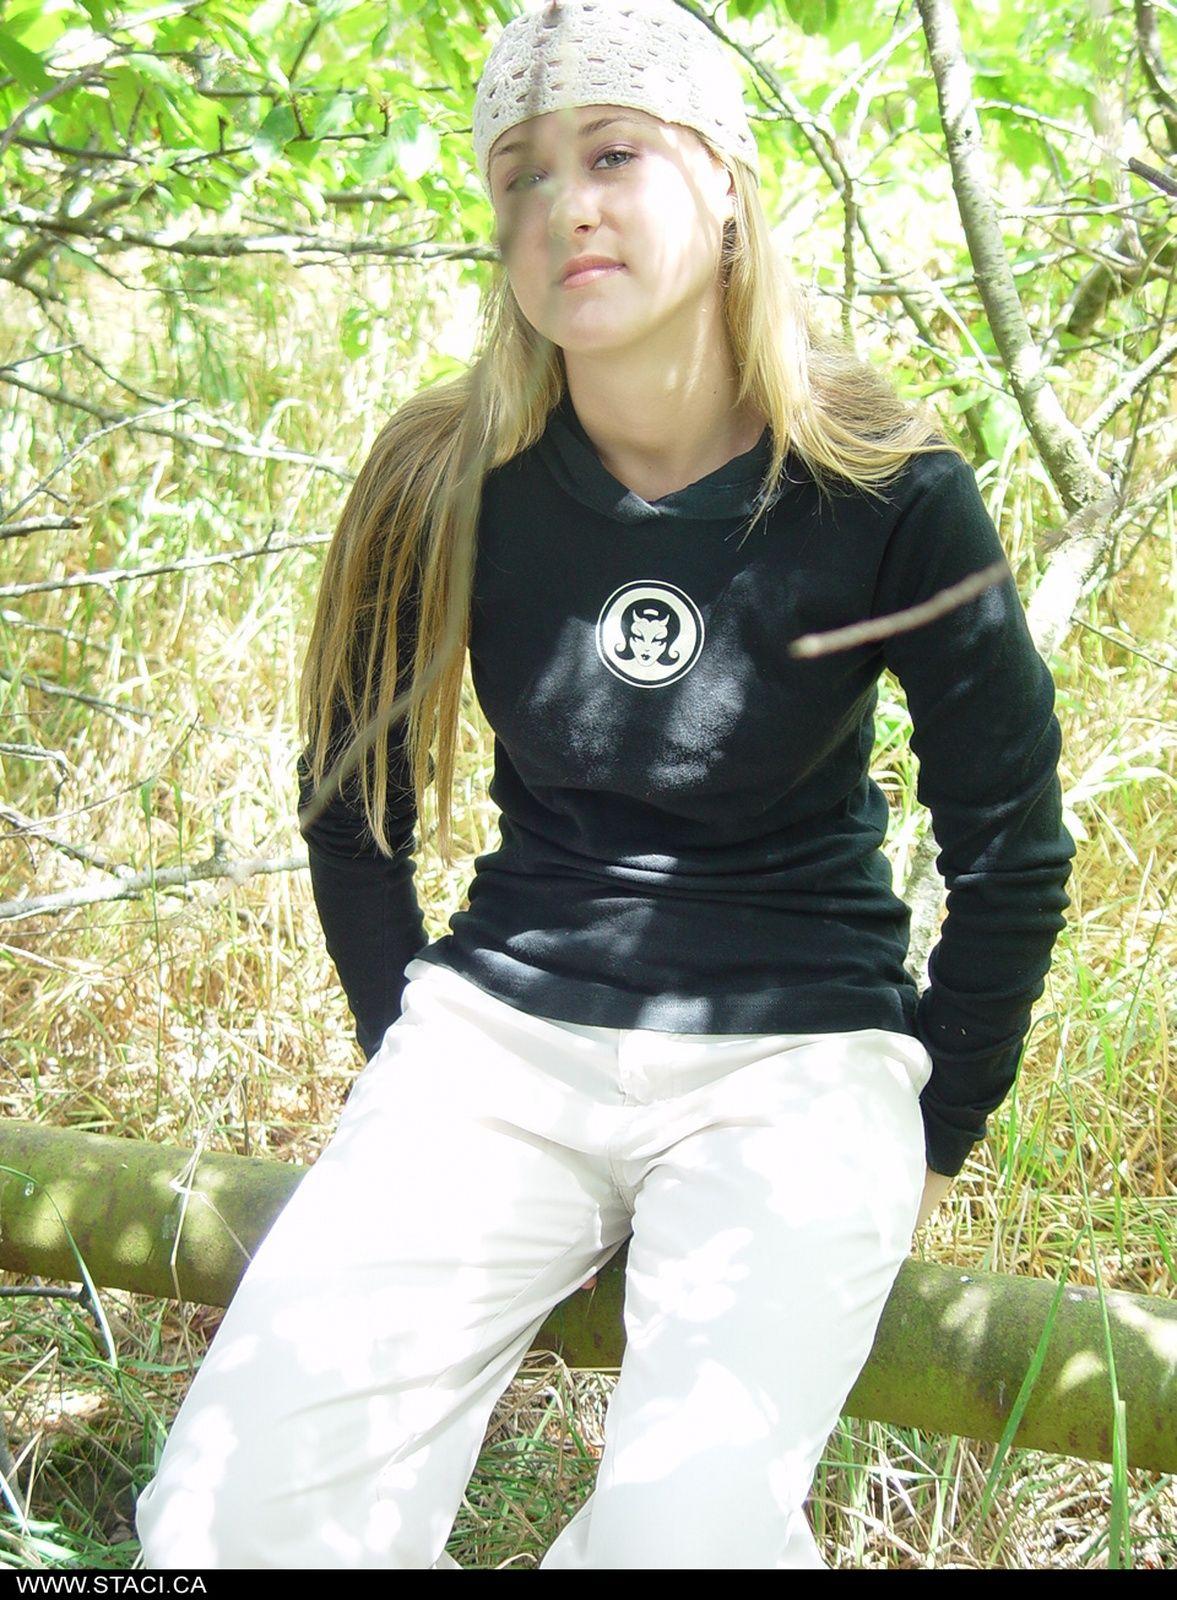 Pictures of teen hottie Staci.ca being naughty in the woods #60003638